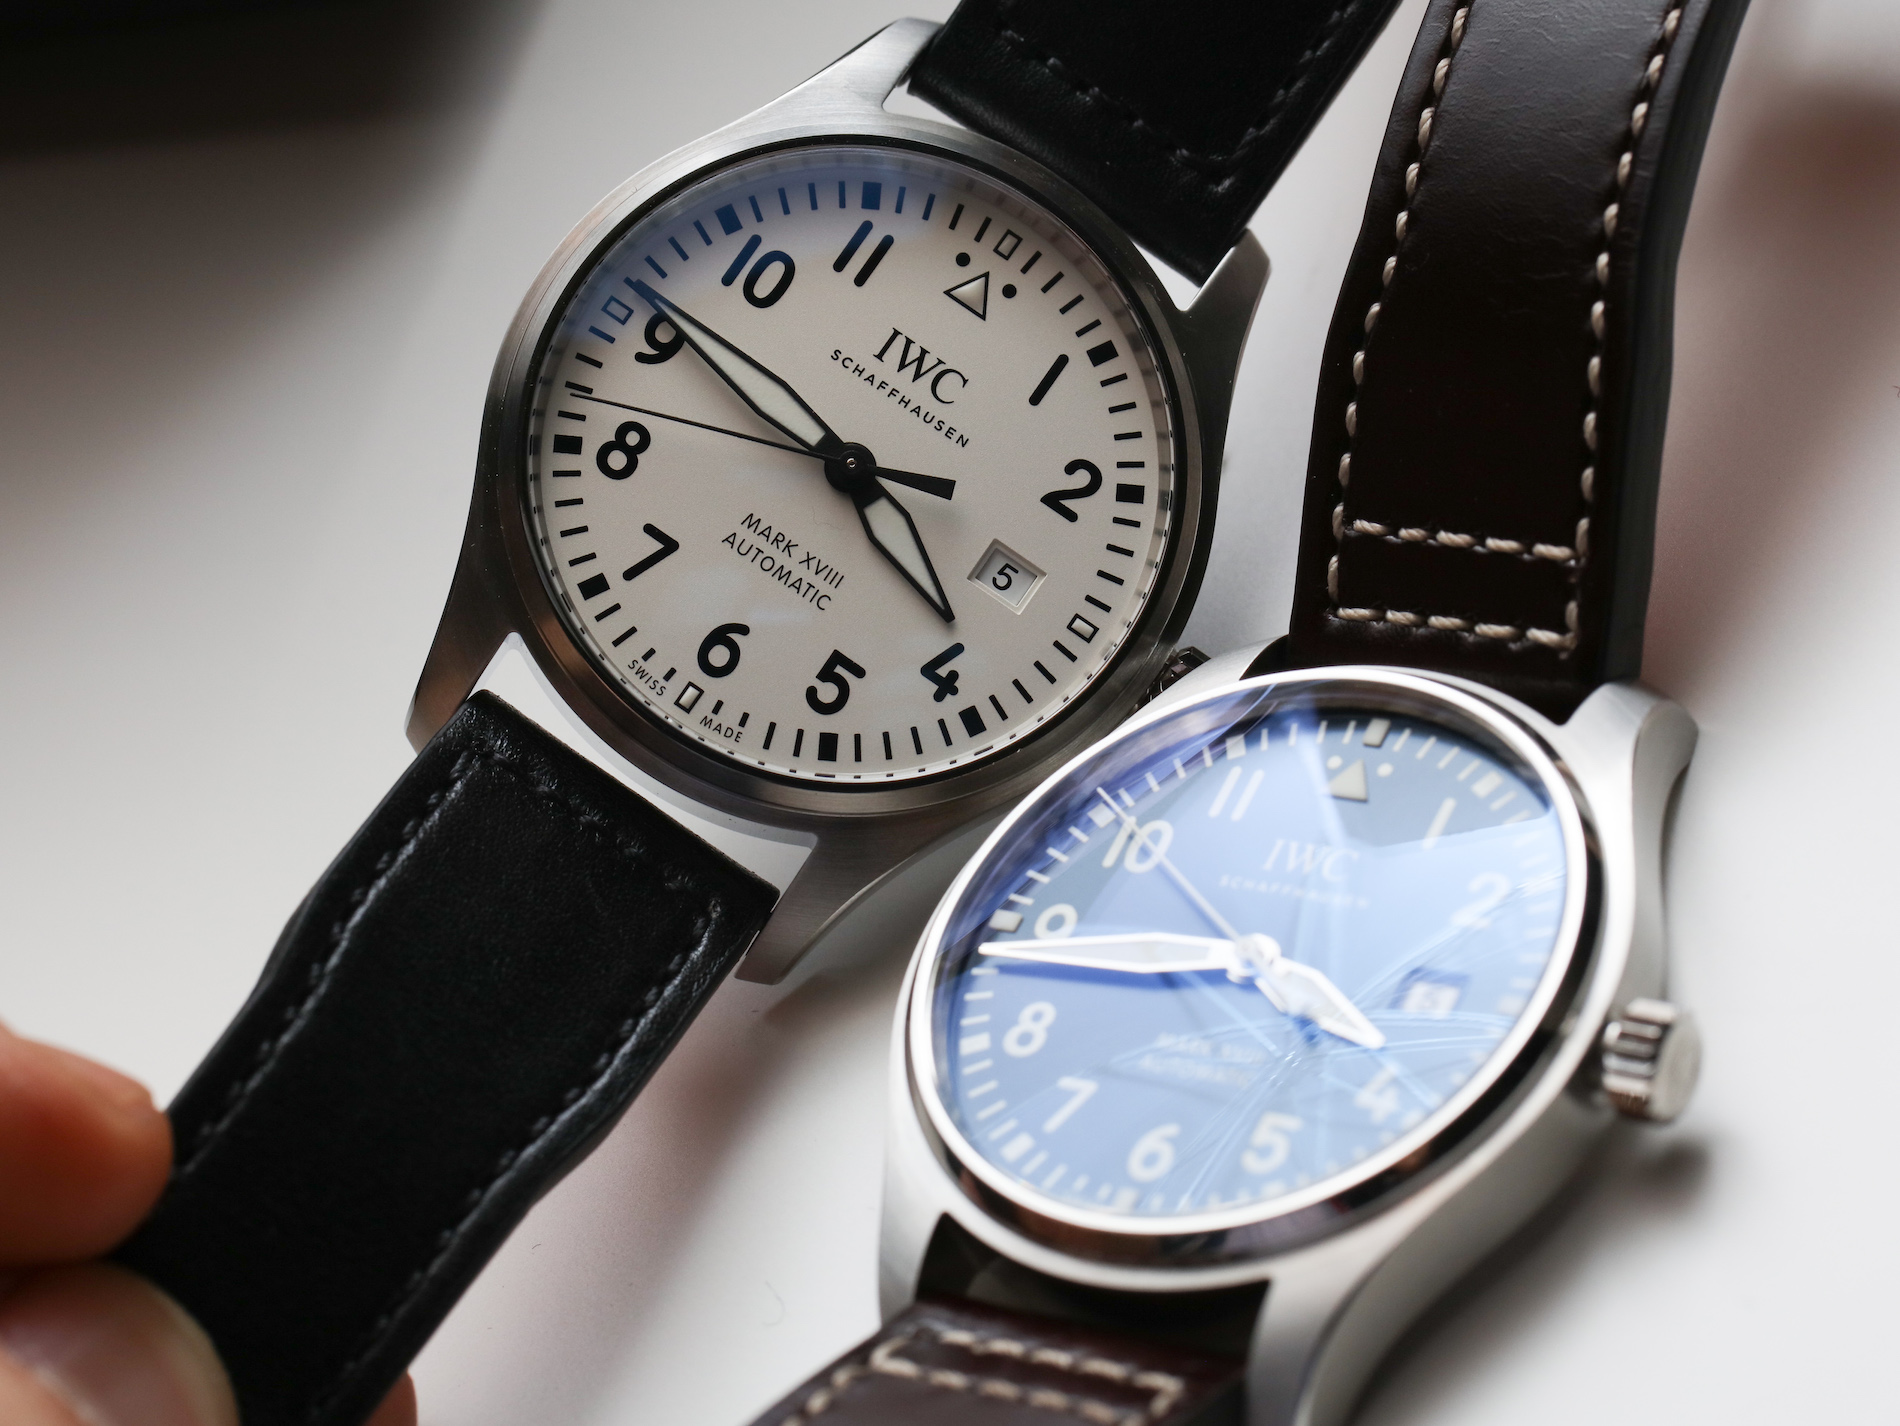 iwc watches